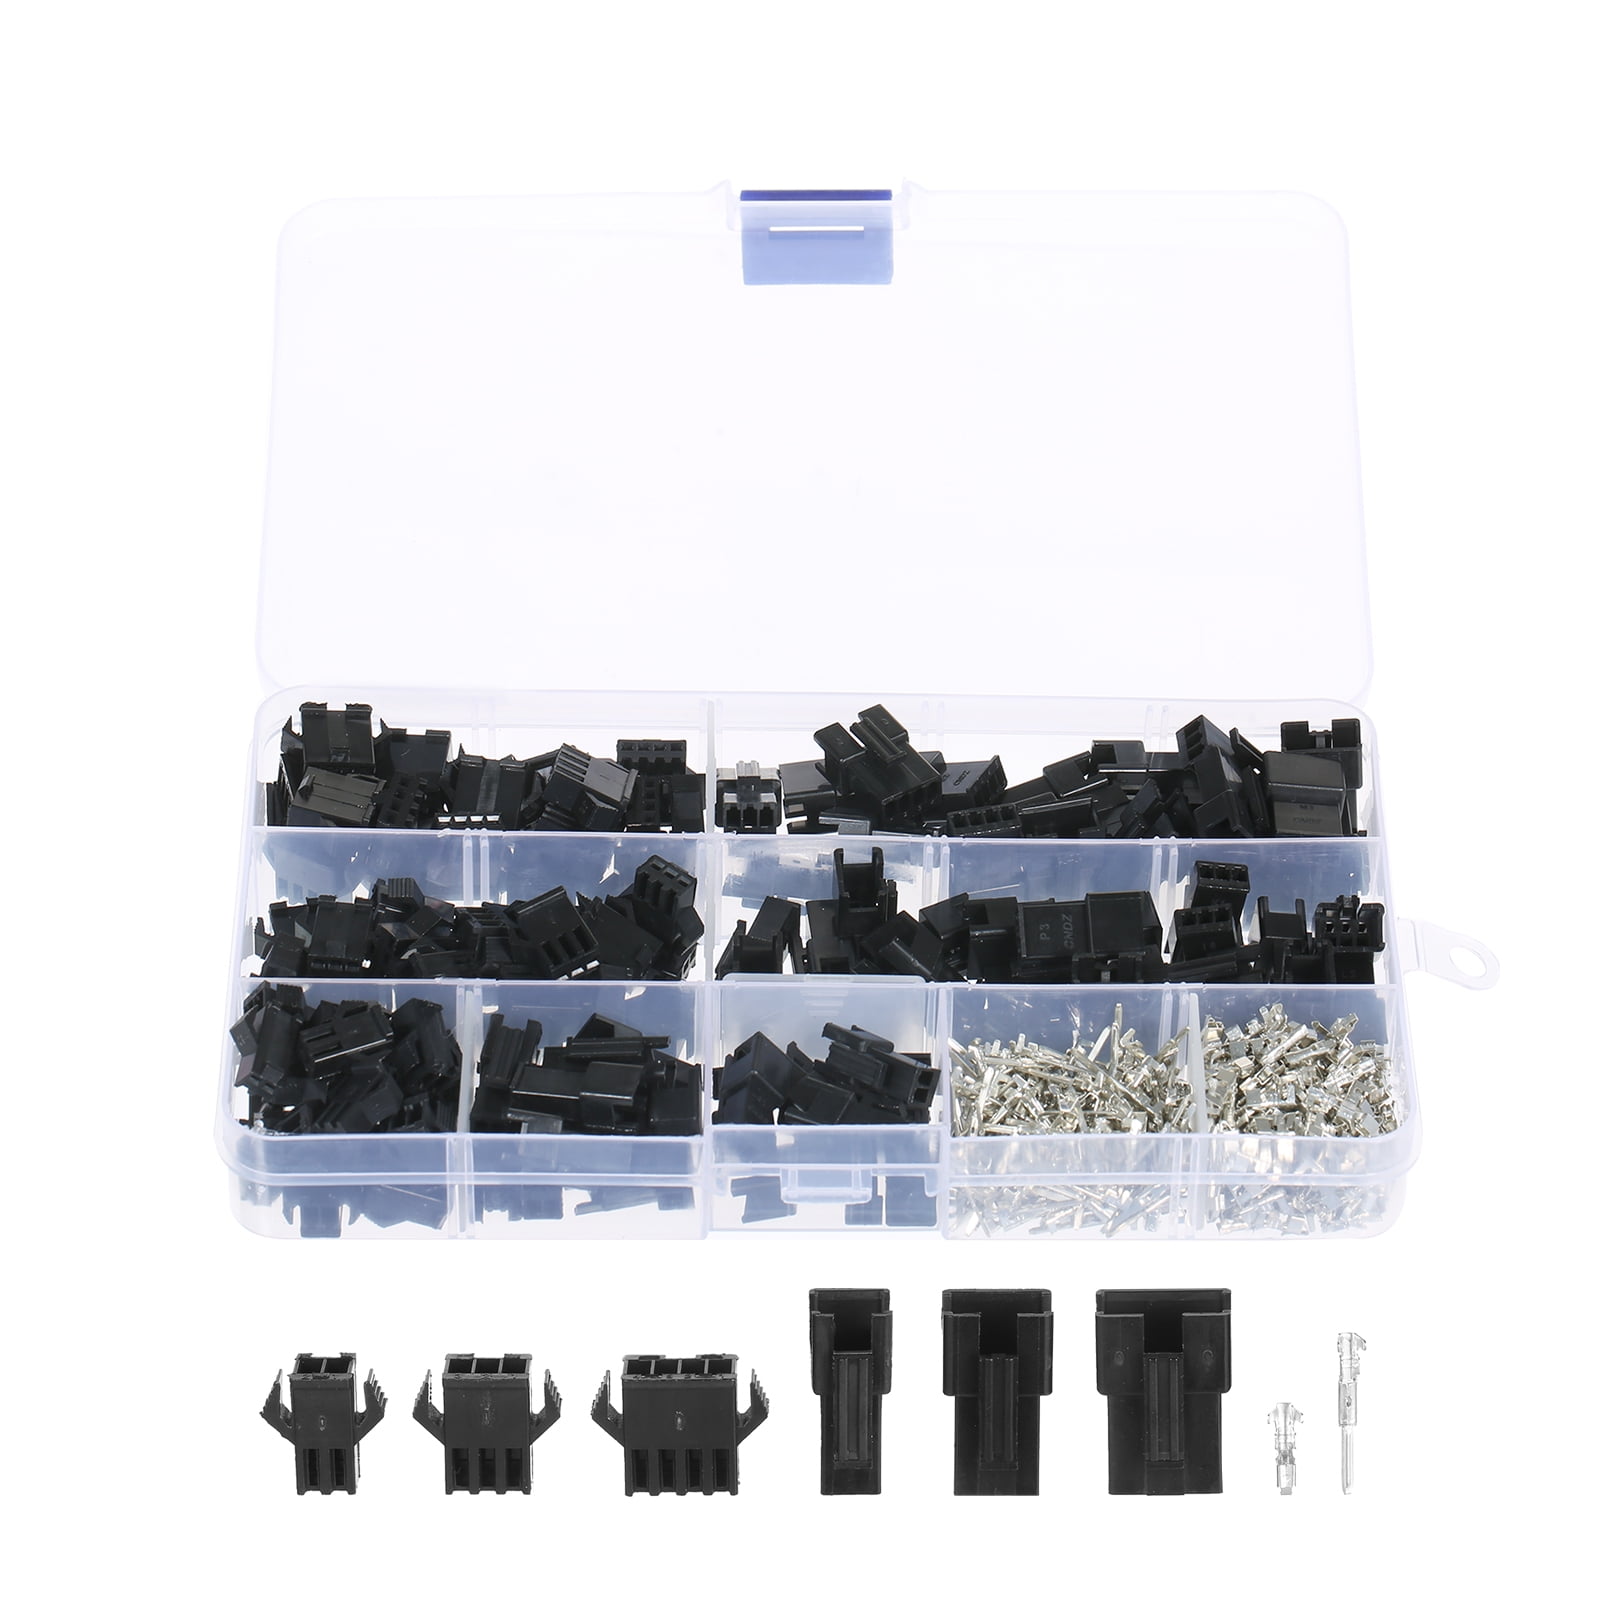 480Pcs JST SM 2.54mm 2-Pin 3-Pin 4-Pin Connector Housing Assortment Kit Female and Male Dupont Connector Set for Jumper Wire Ribbon Cable PC Fan Header Robots Printer